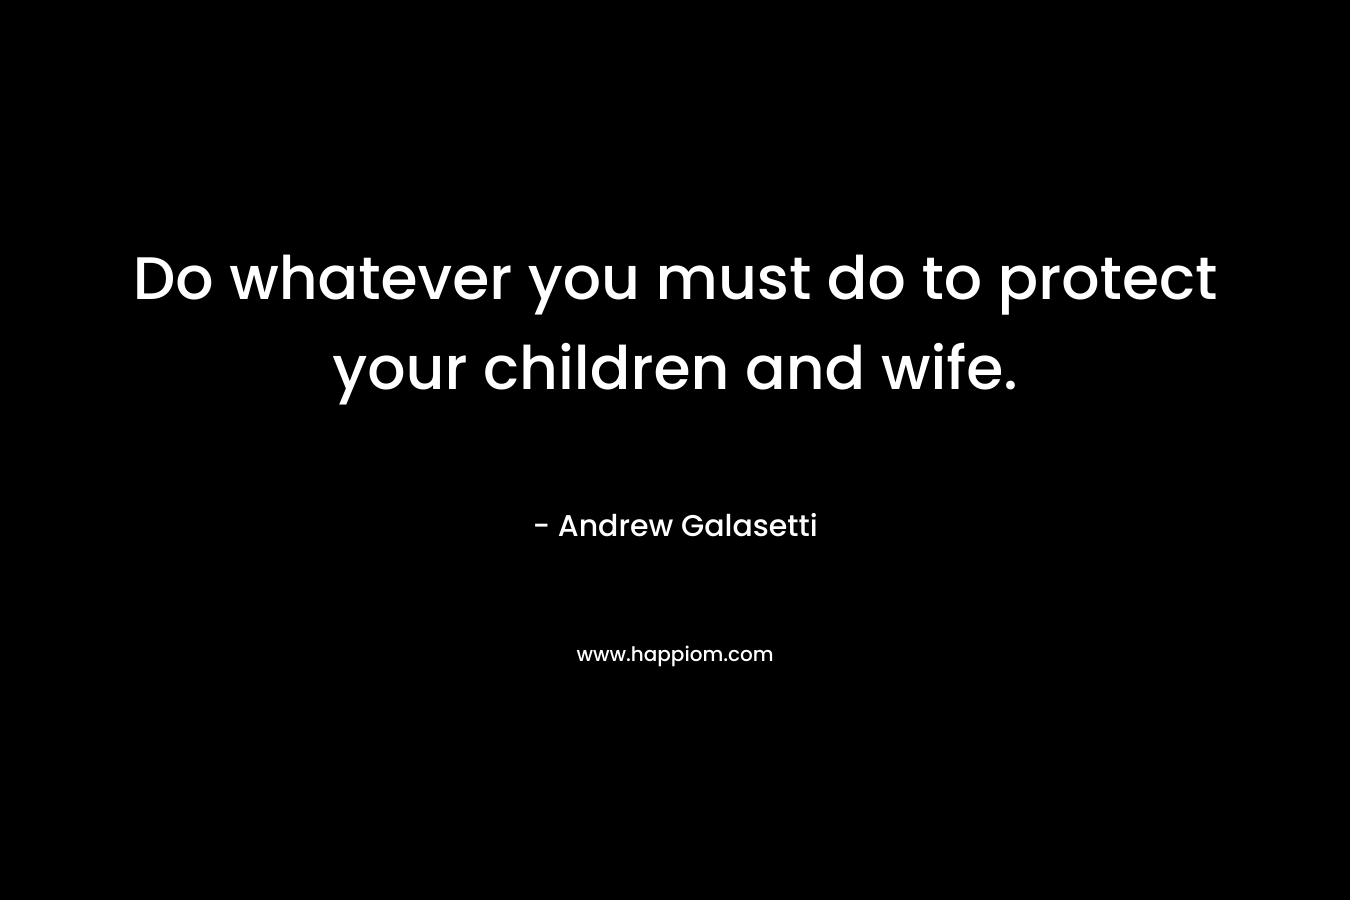 Do whatever you must do to protect your children and wife. – Andrew Galasetti